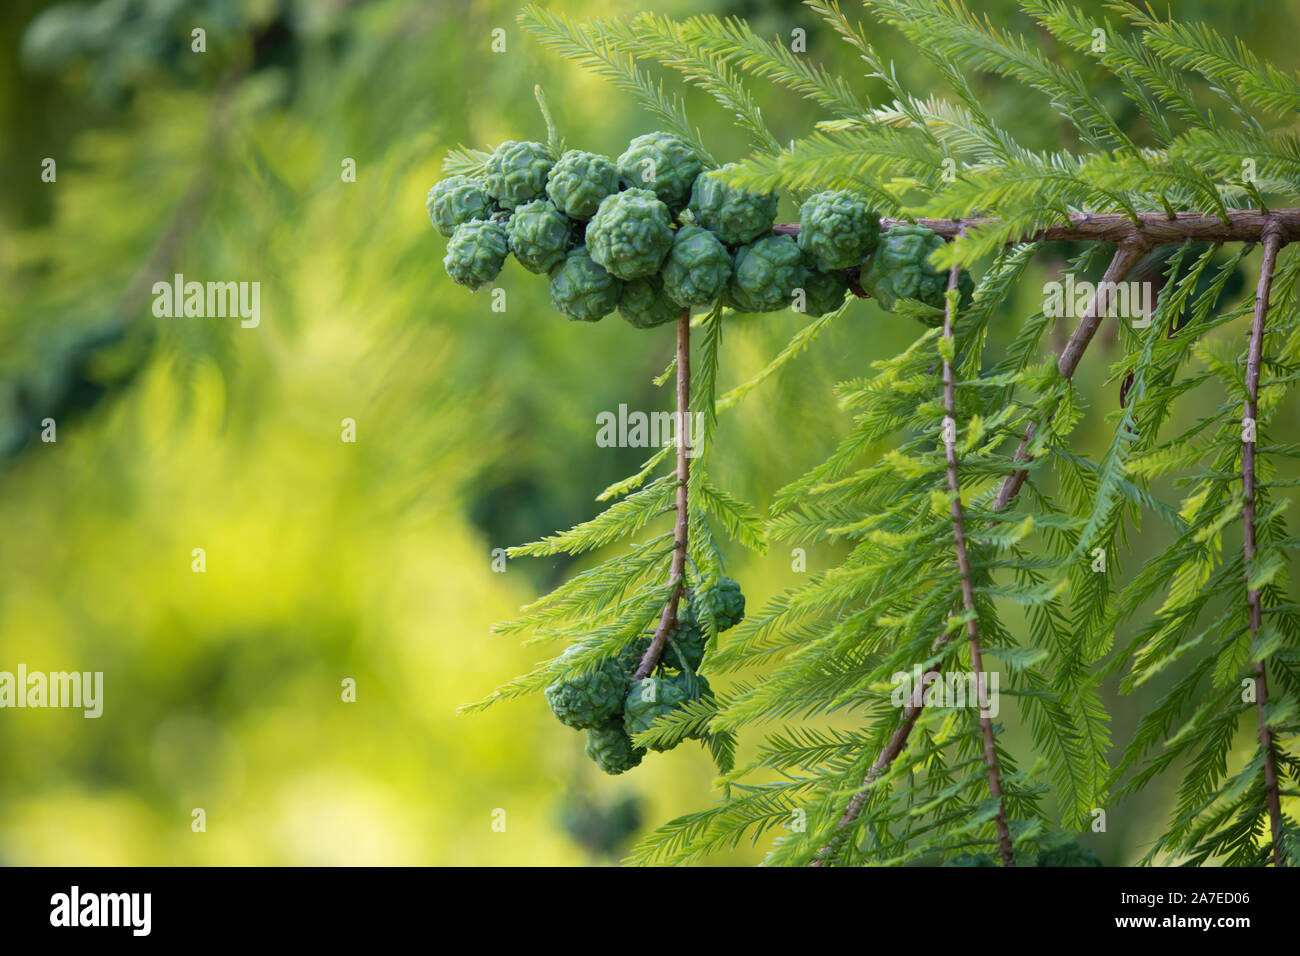 Fruits and leaves of Taxodium distichum tree. photographed in the forest. Blurred Background Stock Photo